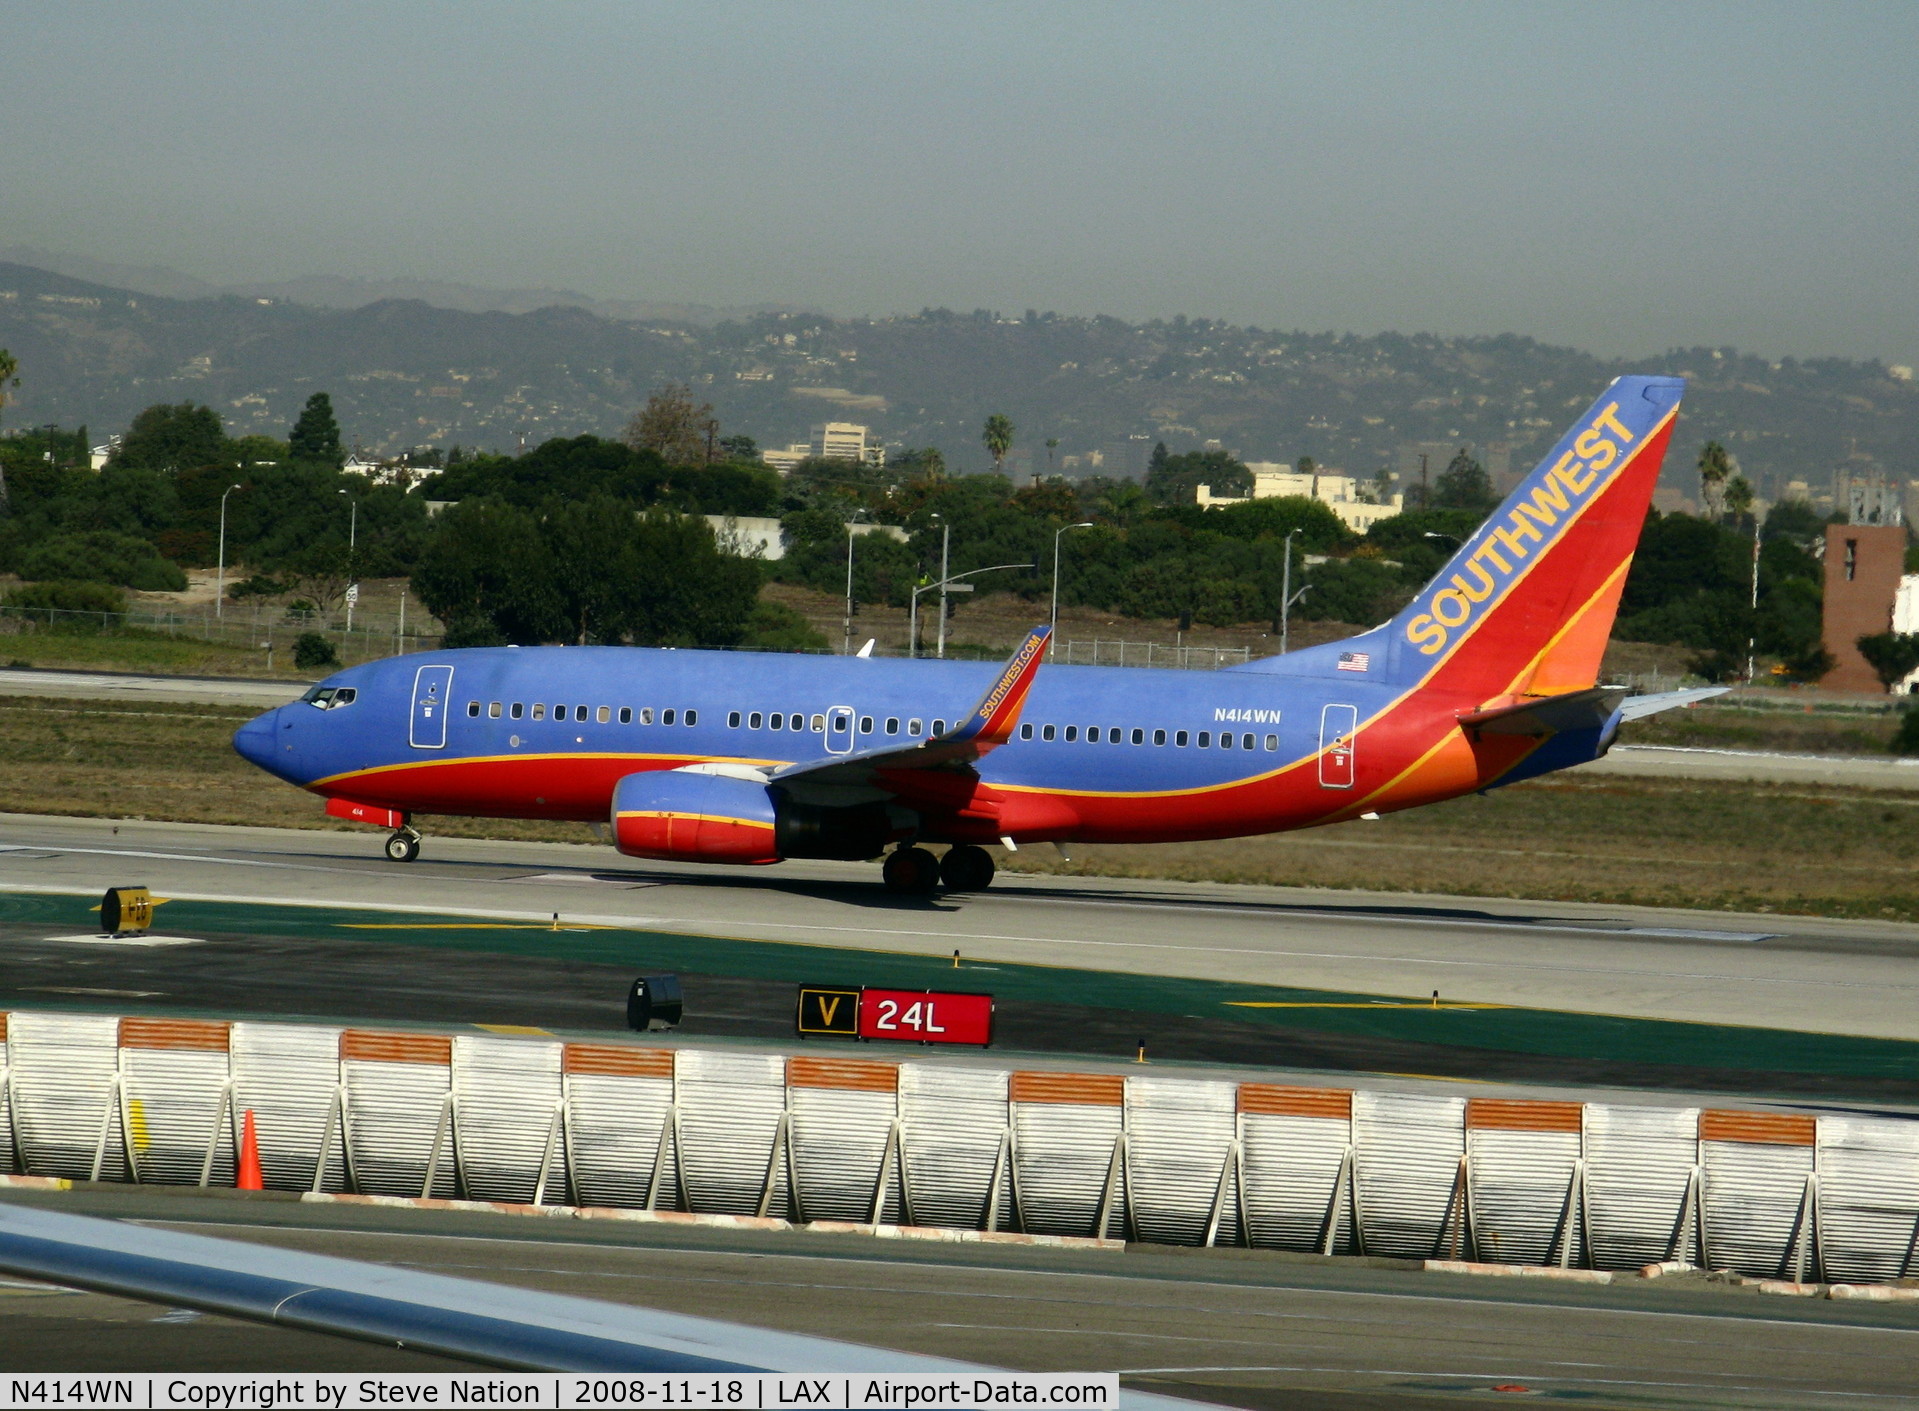 N414WN, 2001 Boeing 737-7H4 C/N 29820, Southwest 2001 Boeing 737-7H4 in new colors with winglets rolling on runway 24L